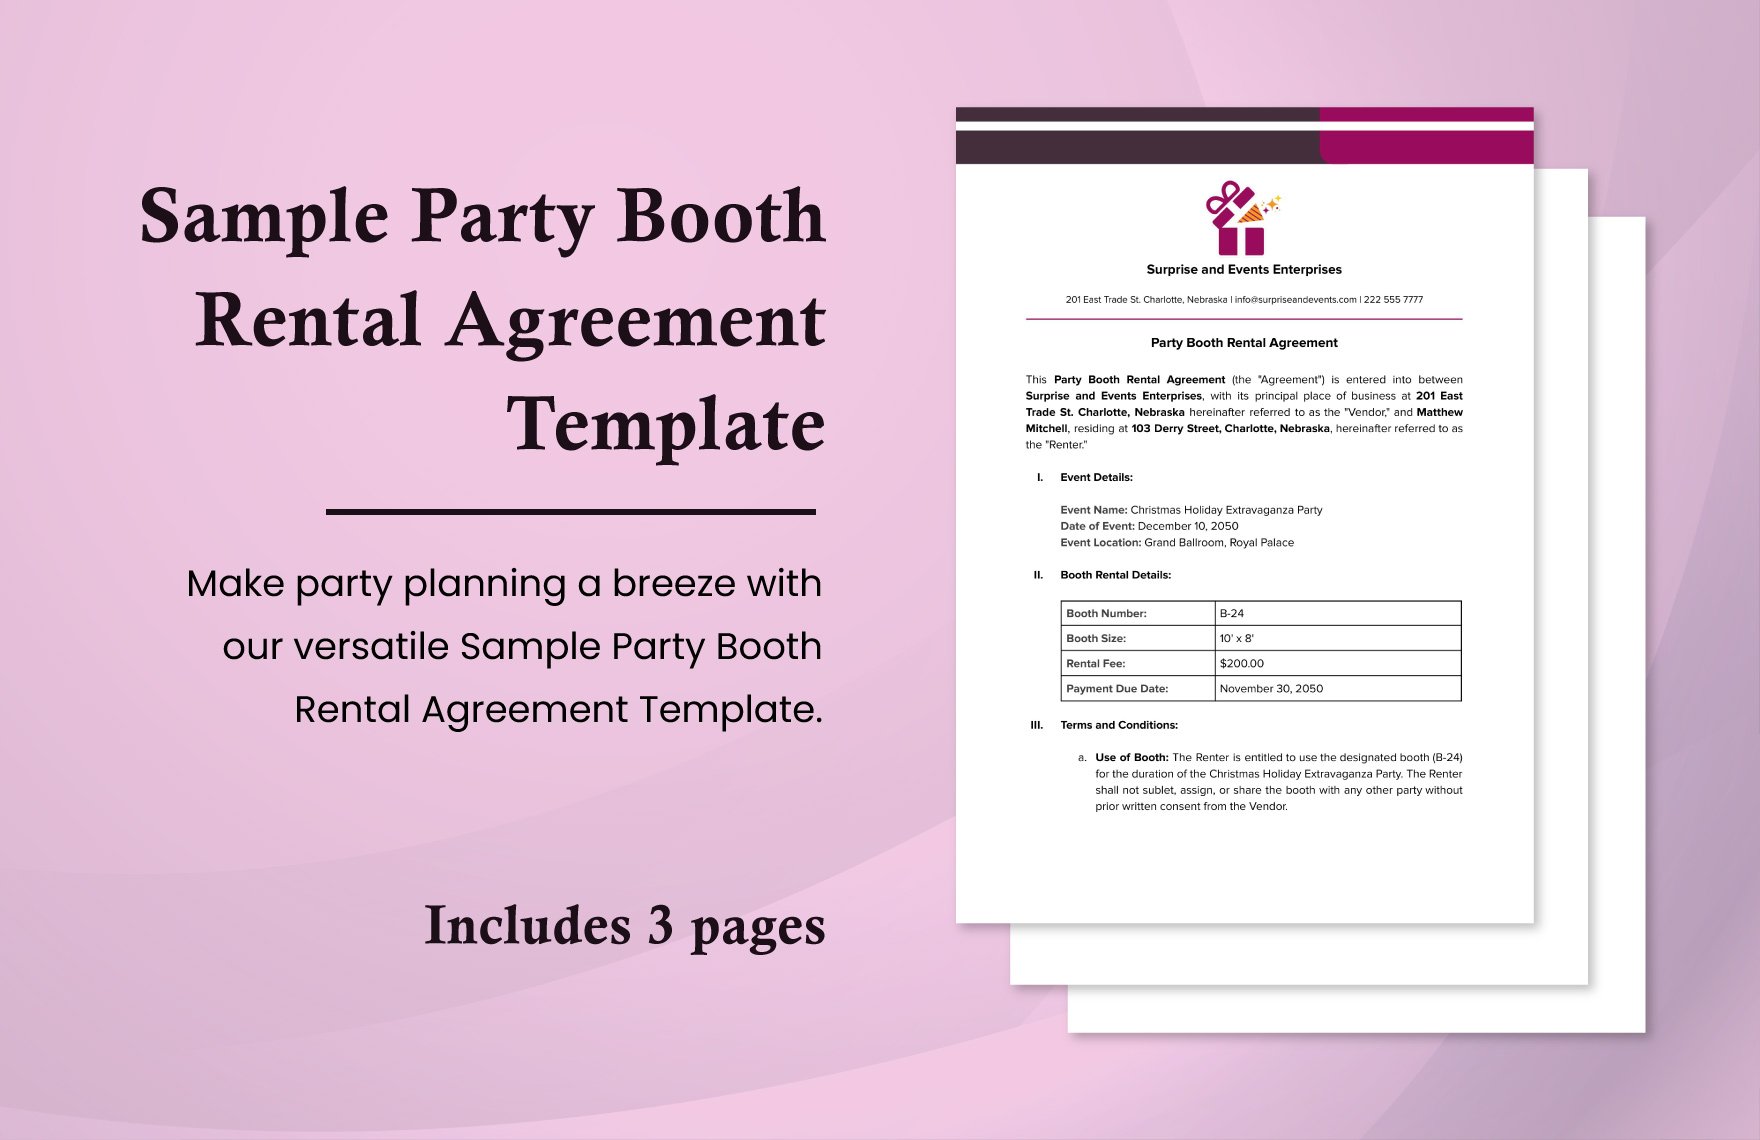 Sample Party Booth Rental Agreement Template